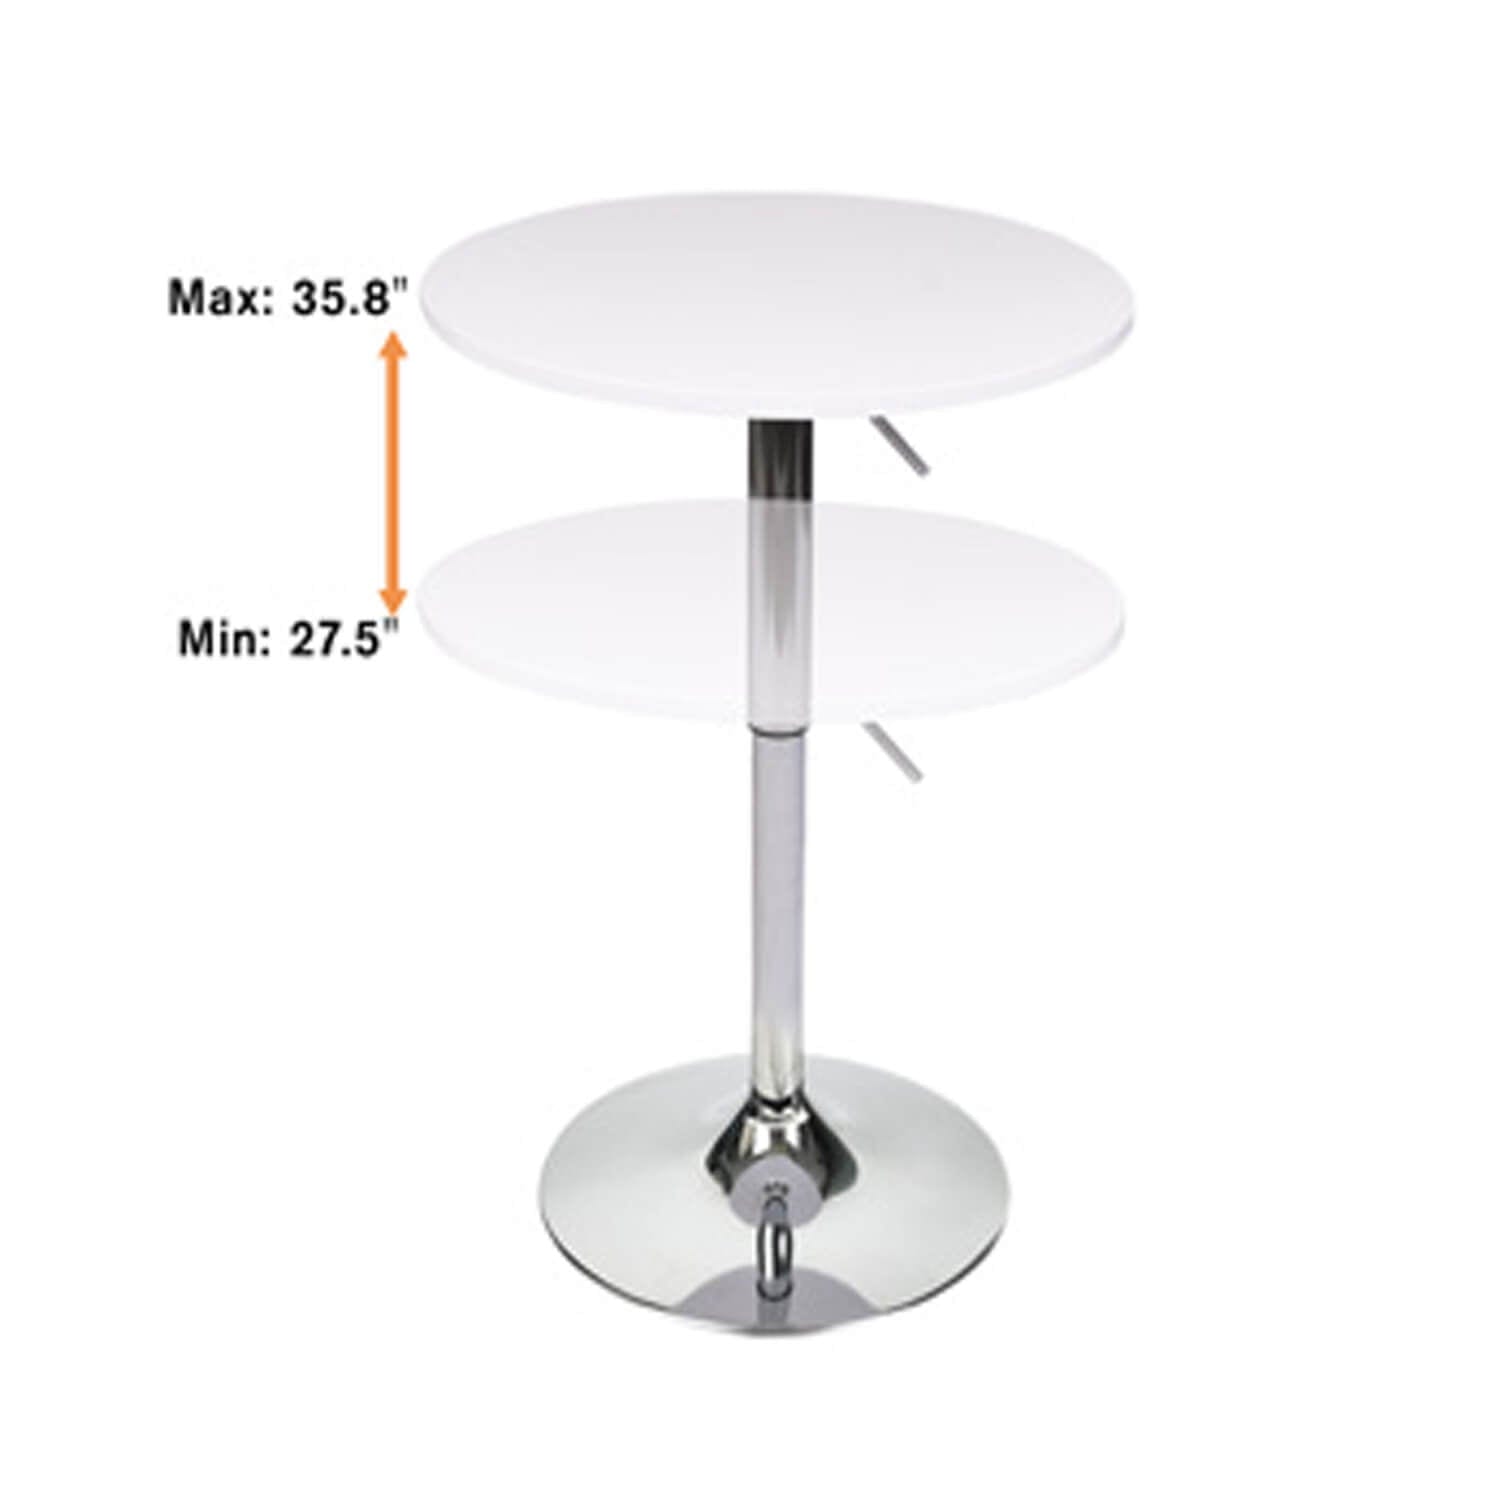 Elecwish White Table OW003 has adjustable height